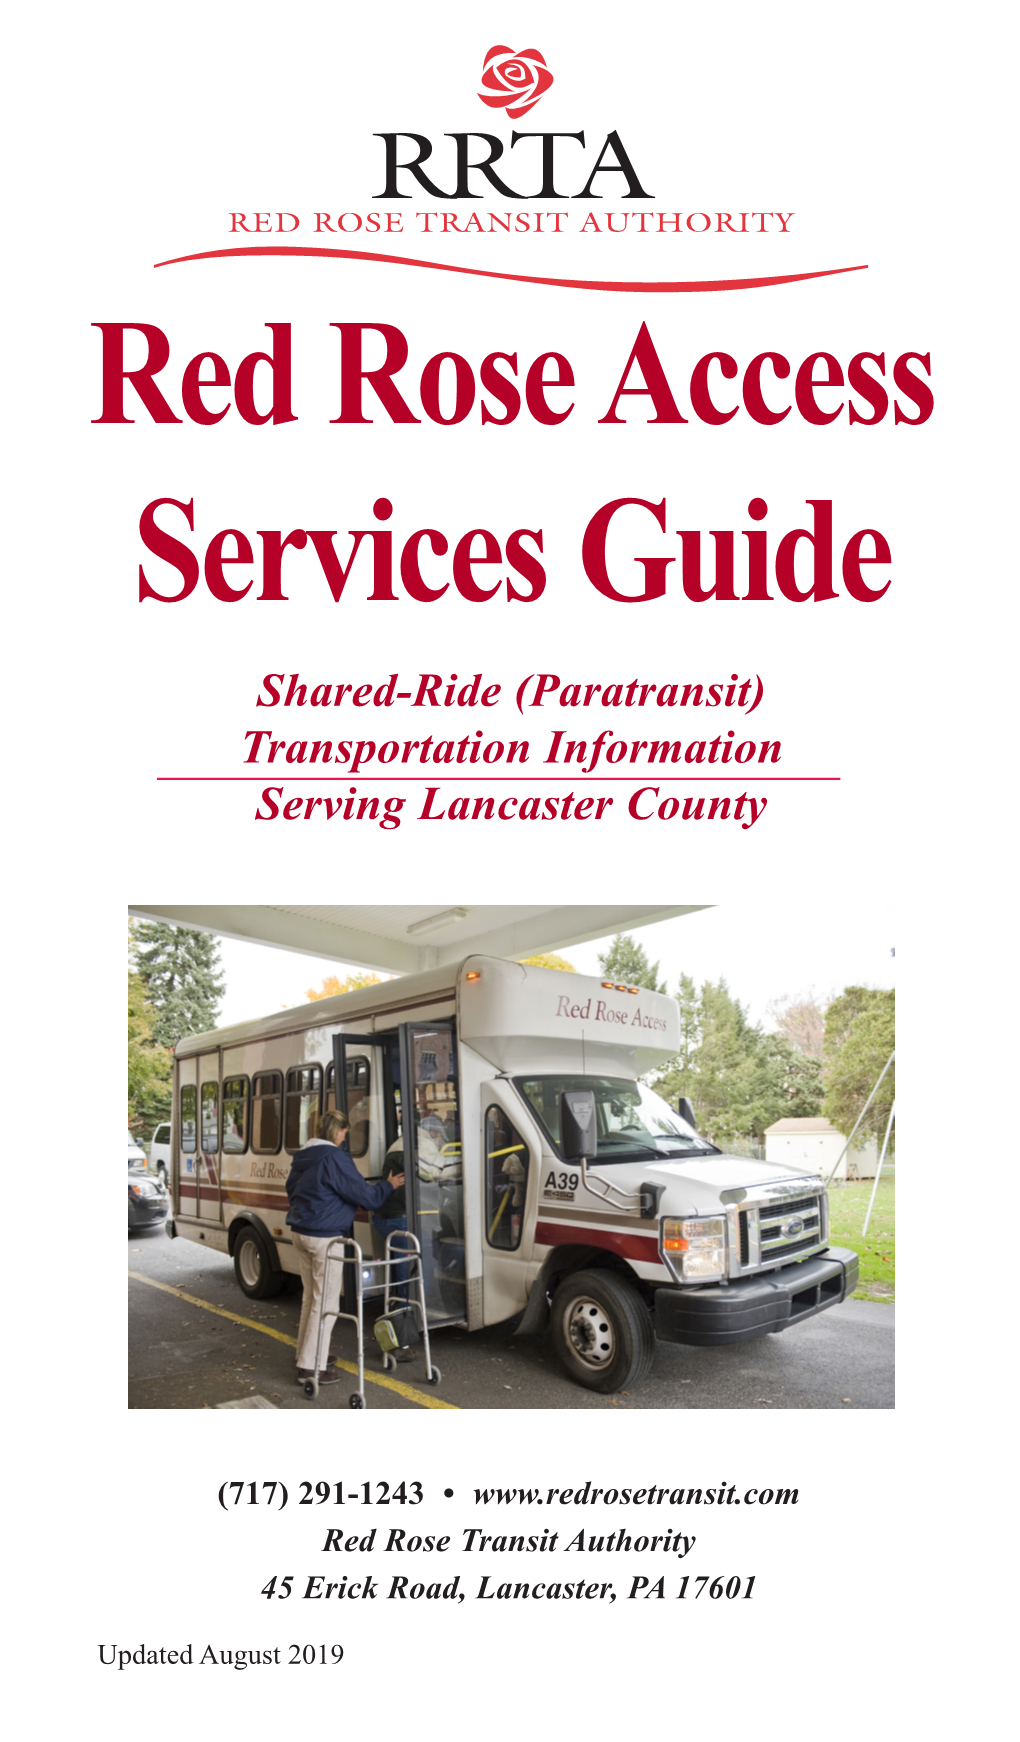 Red Rose Access Services Guide Shared-Ride (Paratransit) Transportation Information Serving Lancaster County